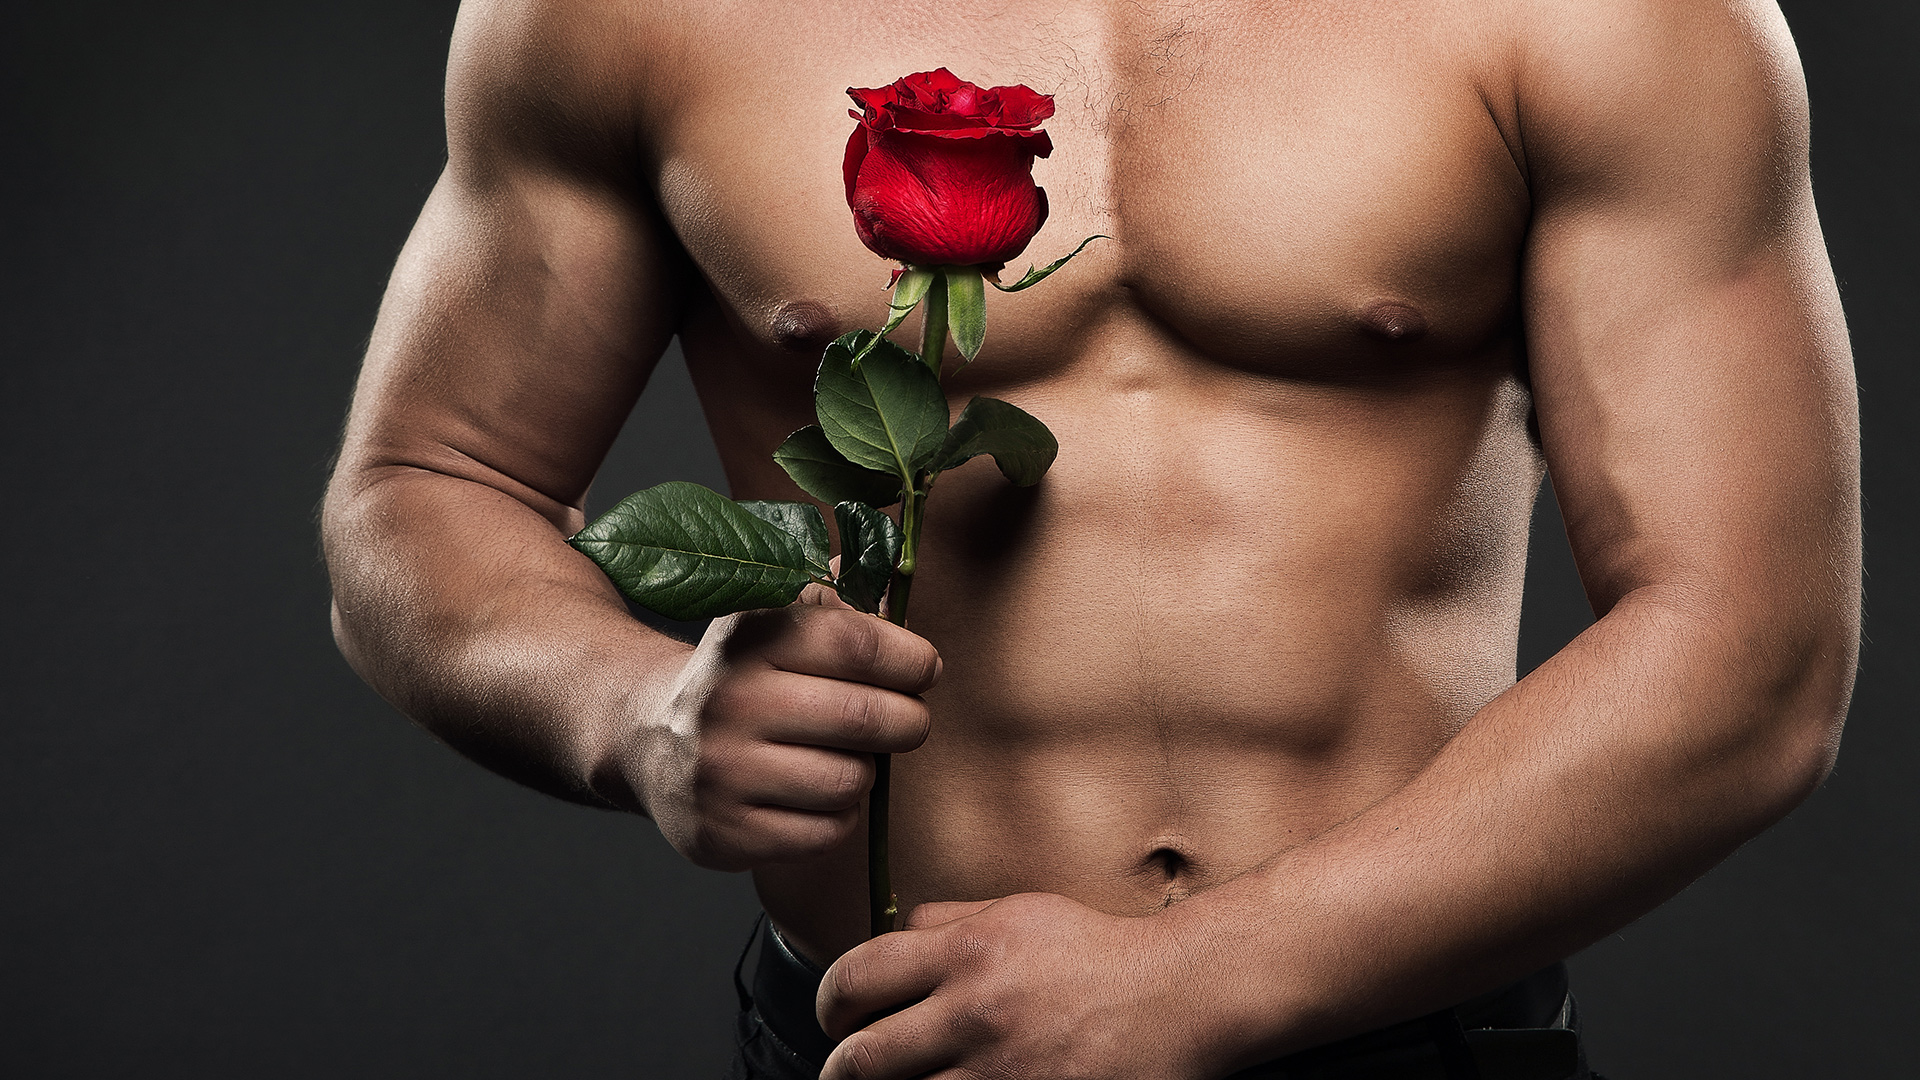 Shirtless upper body of a muscular man holding a red rose with both hands. Black background.